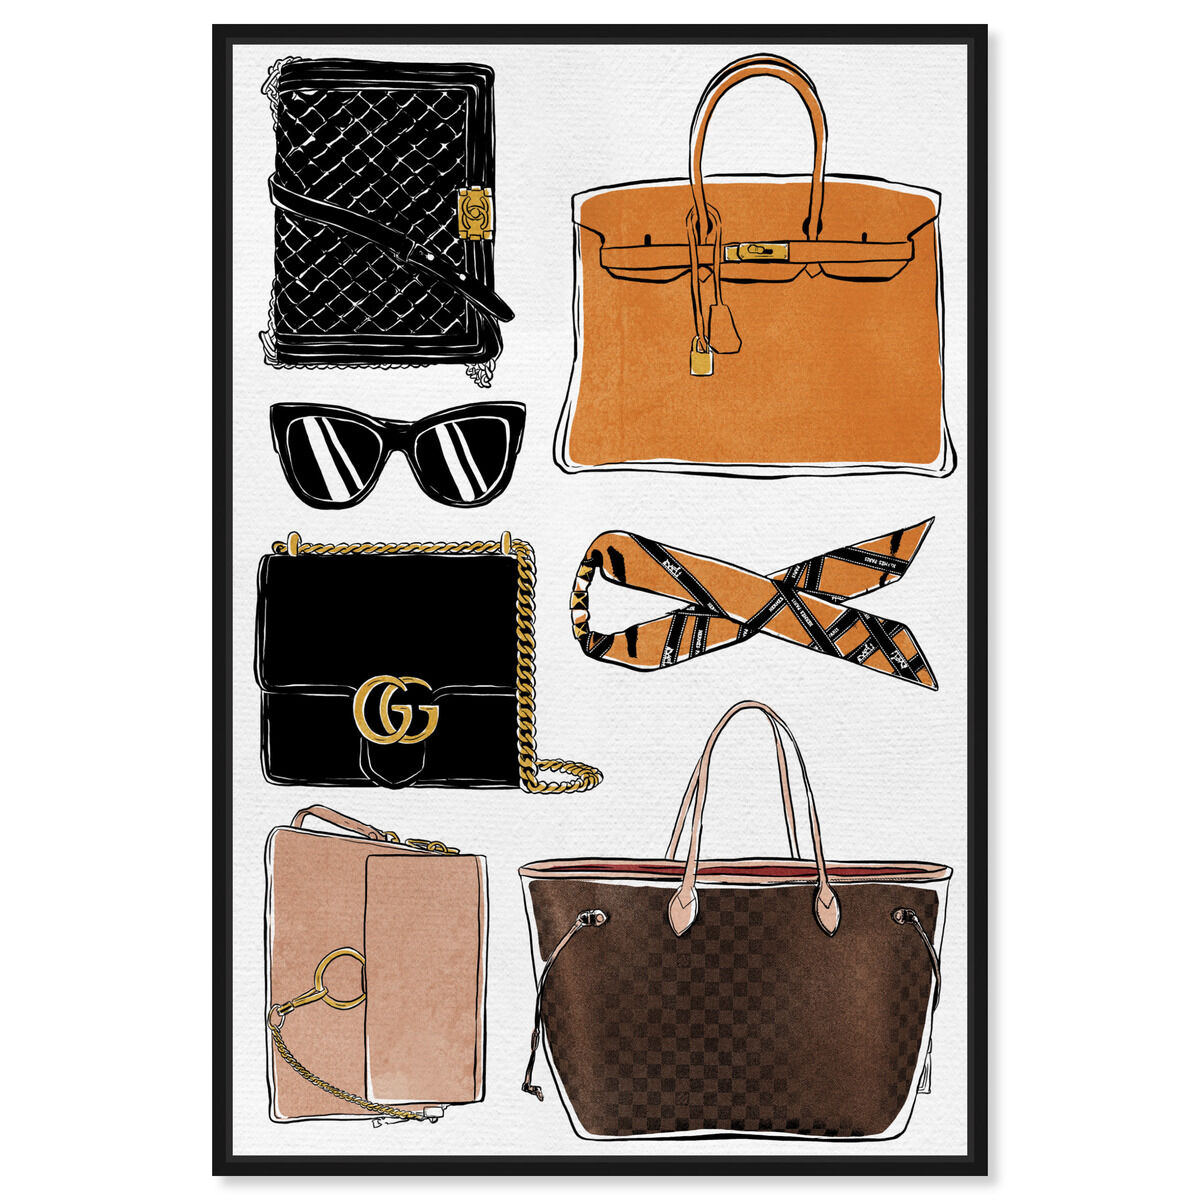 spot goods】☼❐Sarawat and Tine 2gether The Series Fashion Art Drawing  Handbags Canvas Tote Bag Cute | Shopee Philippines